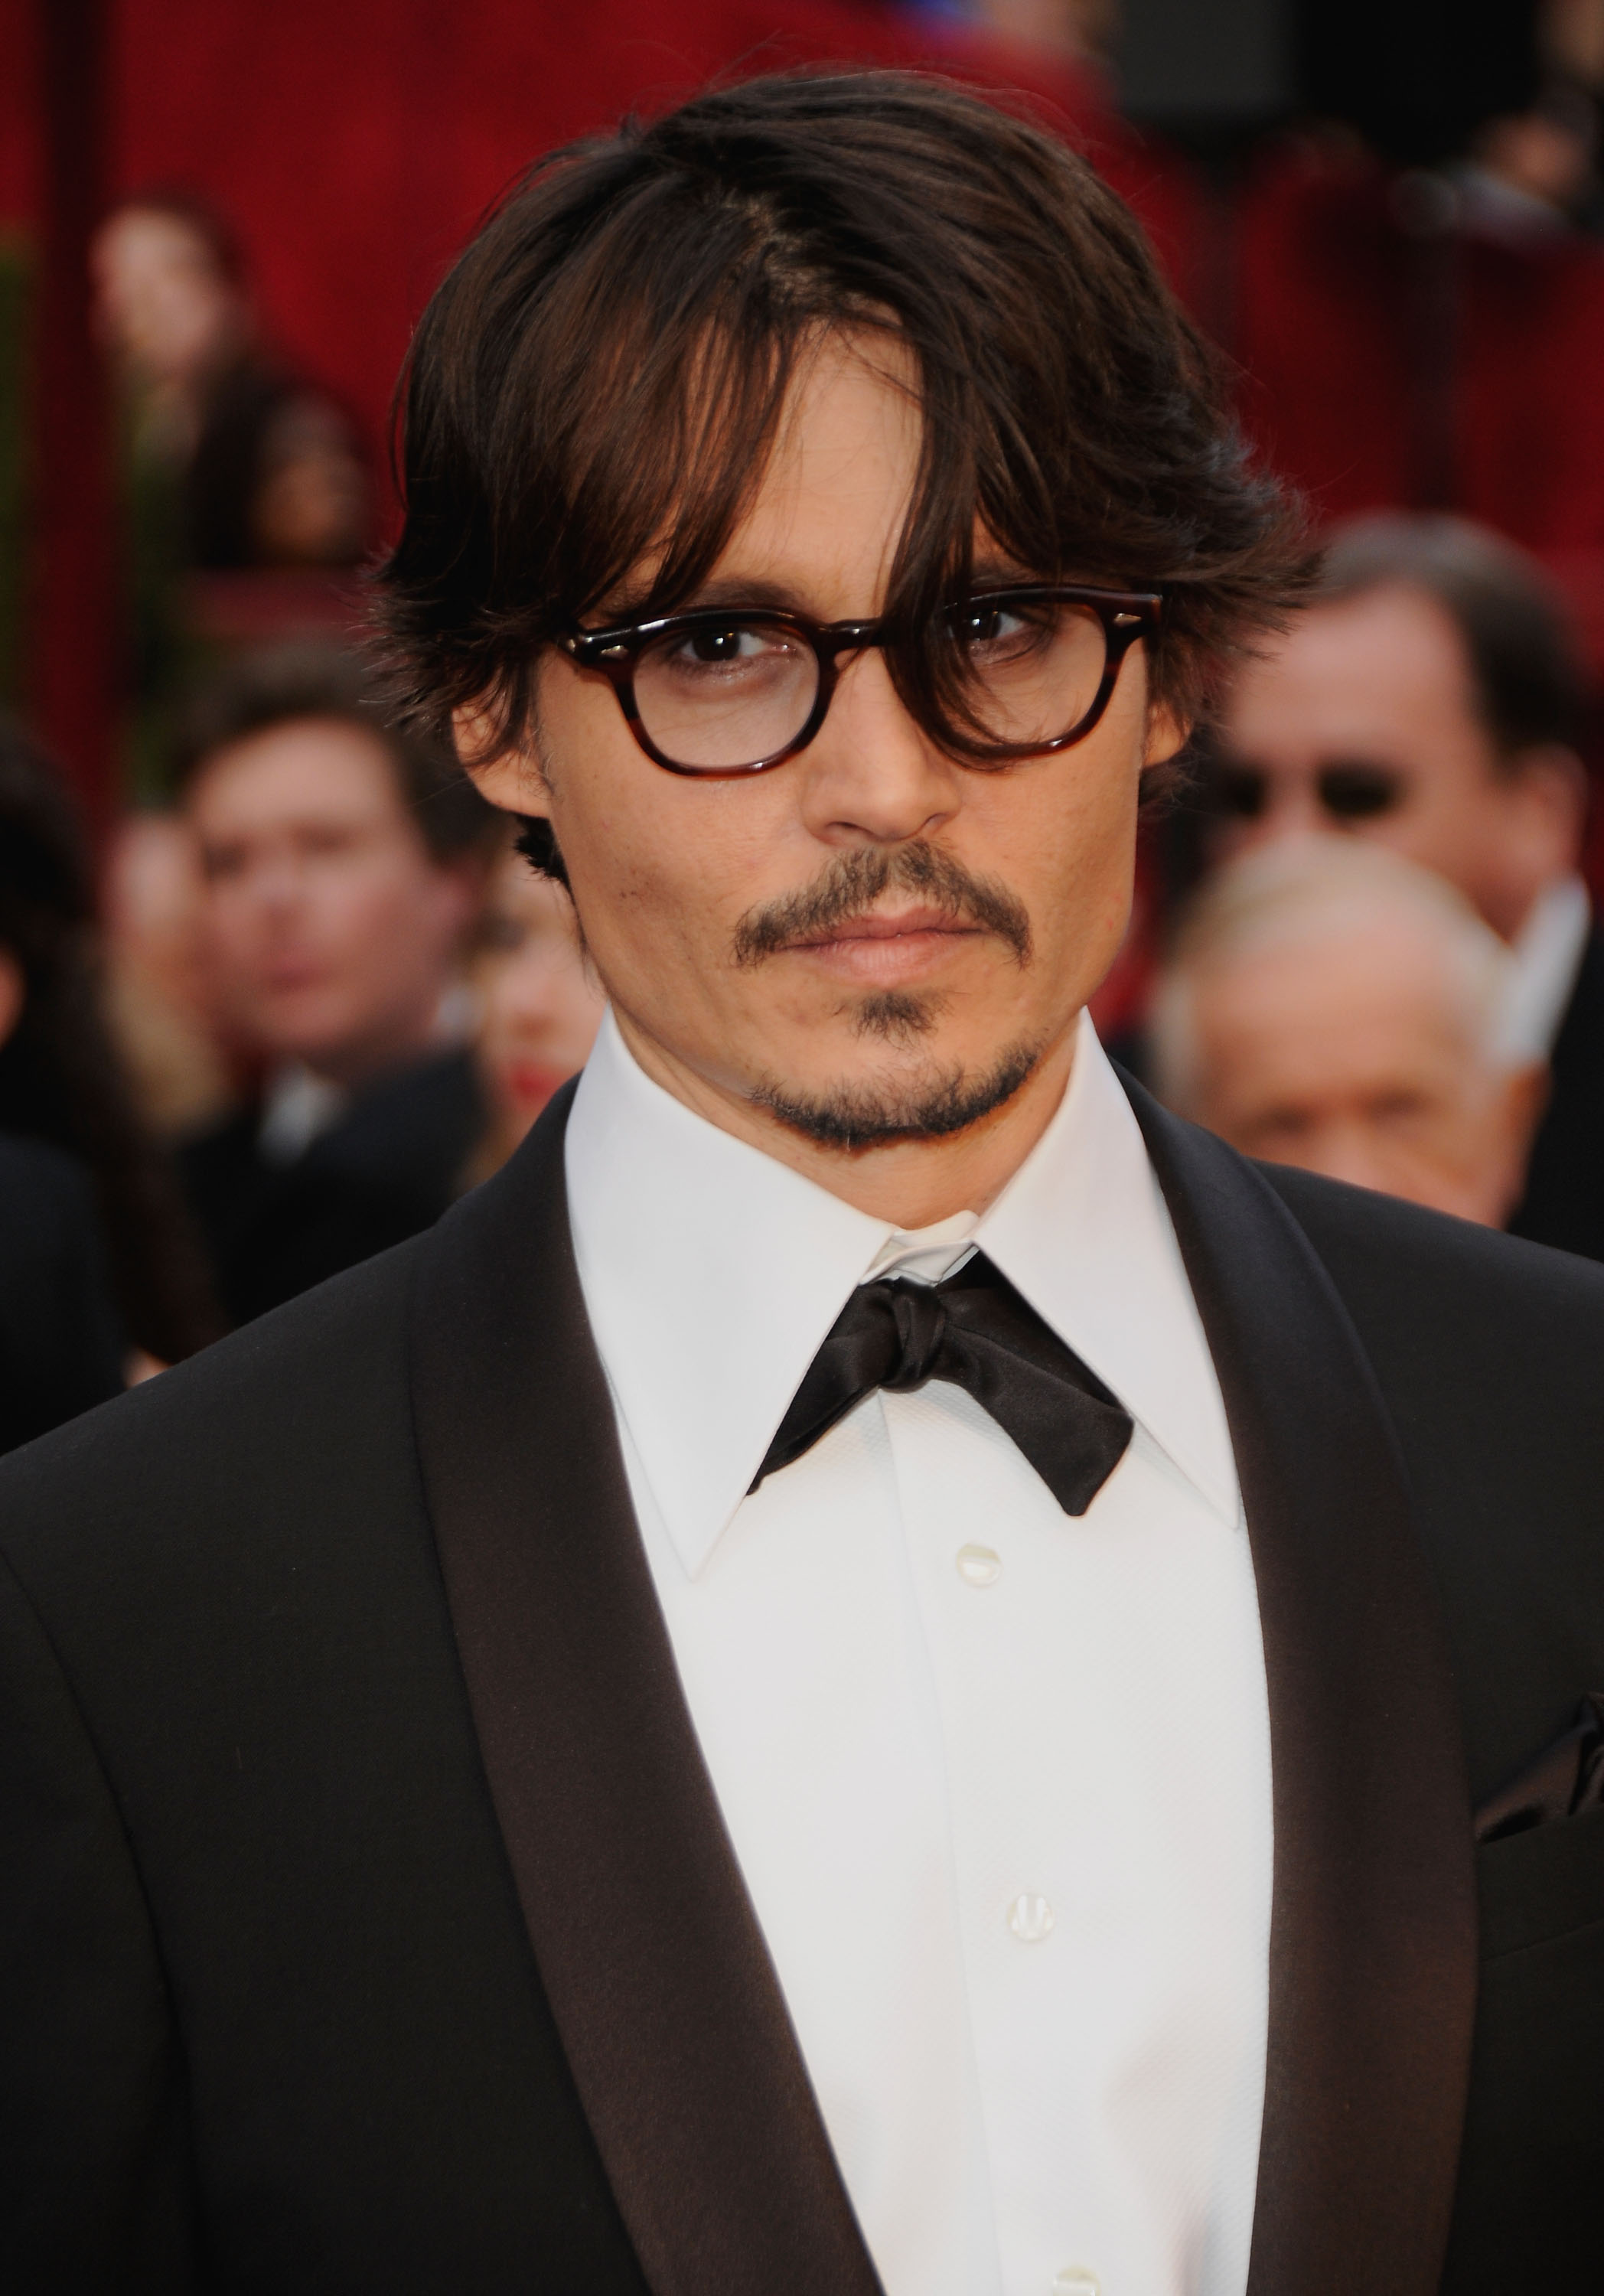 Johnny Depp at the 80th Annual Academy Awards on February 24, 2008 in Hollywood. | Source: Getty Images